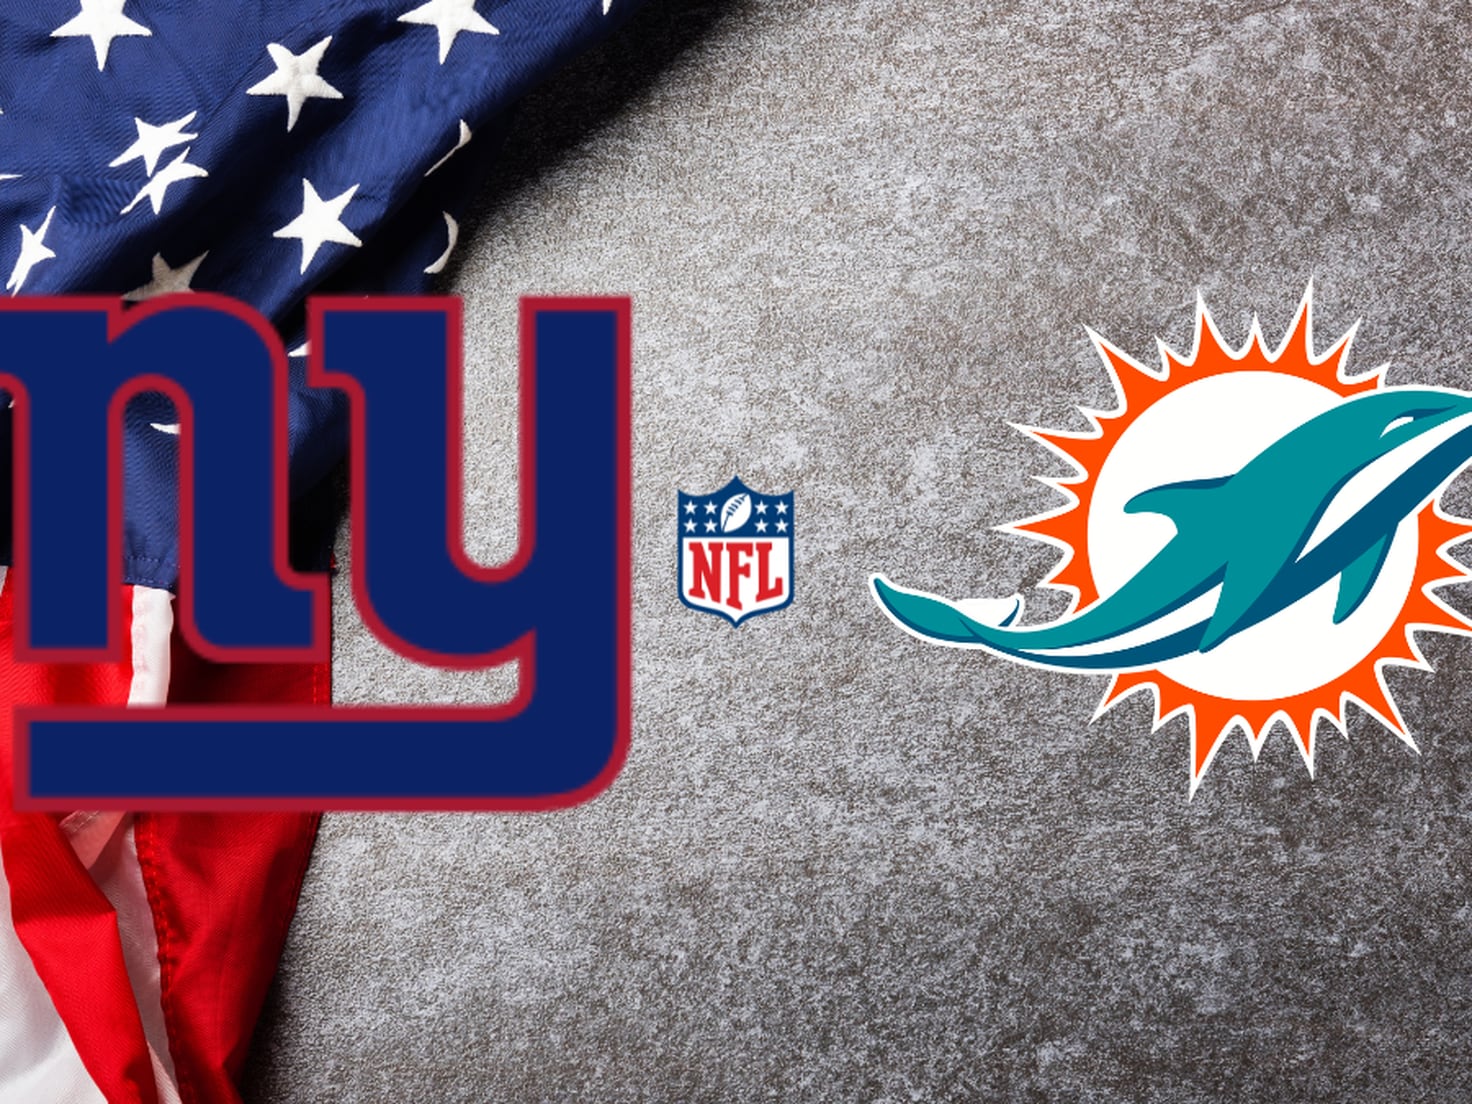 New York Giants vs Miami Dolphins: times, how to watch on TV, stream online